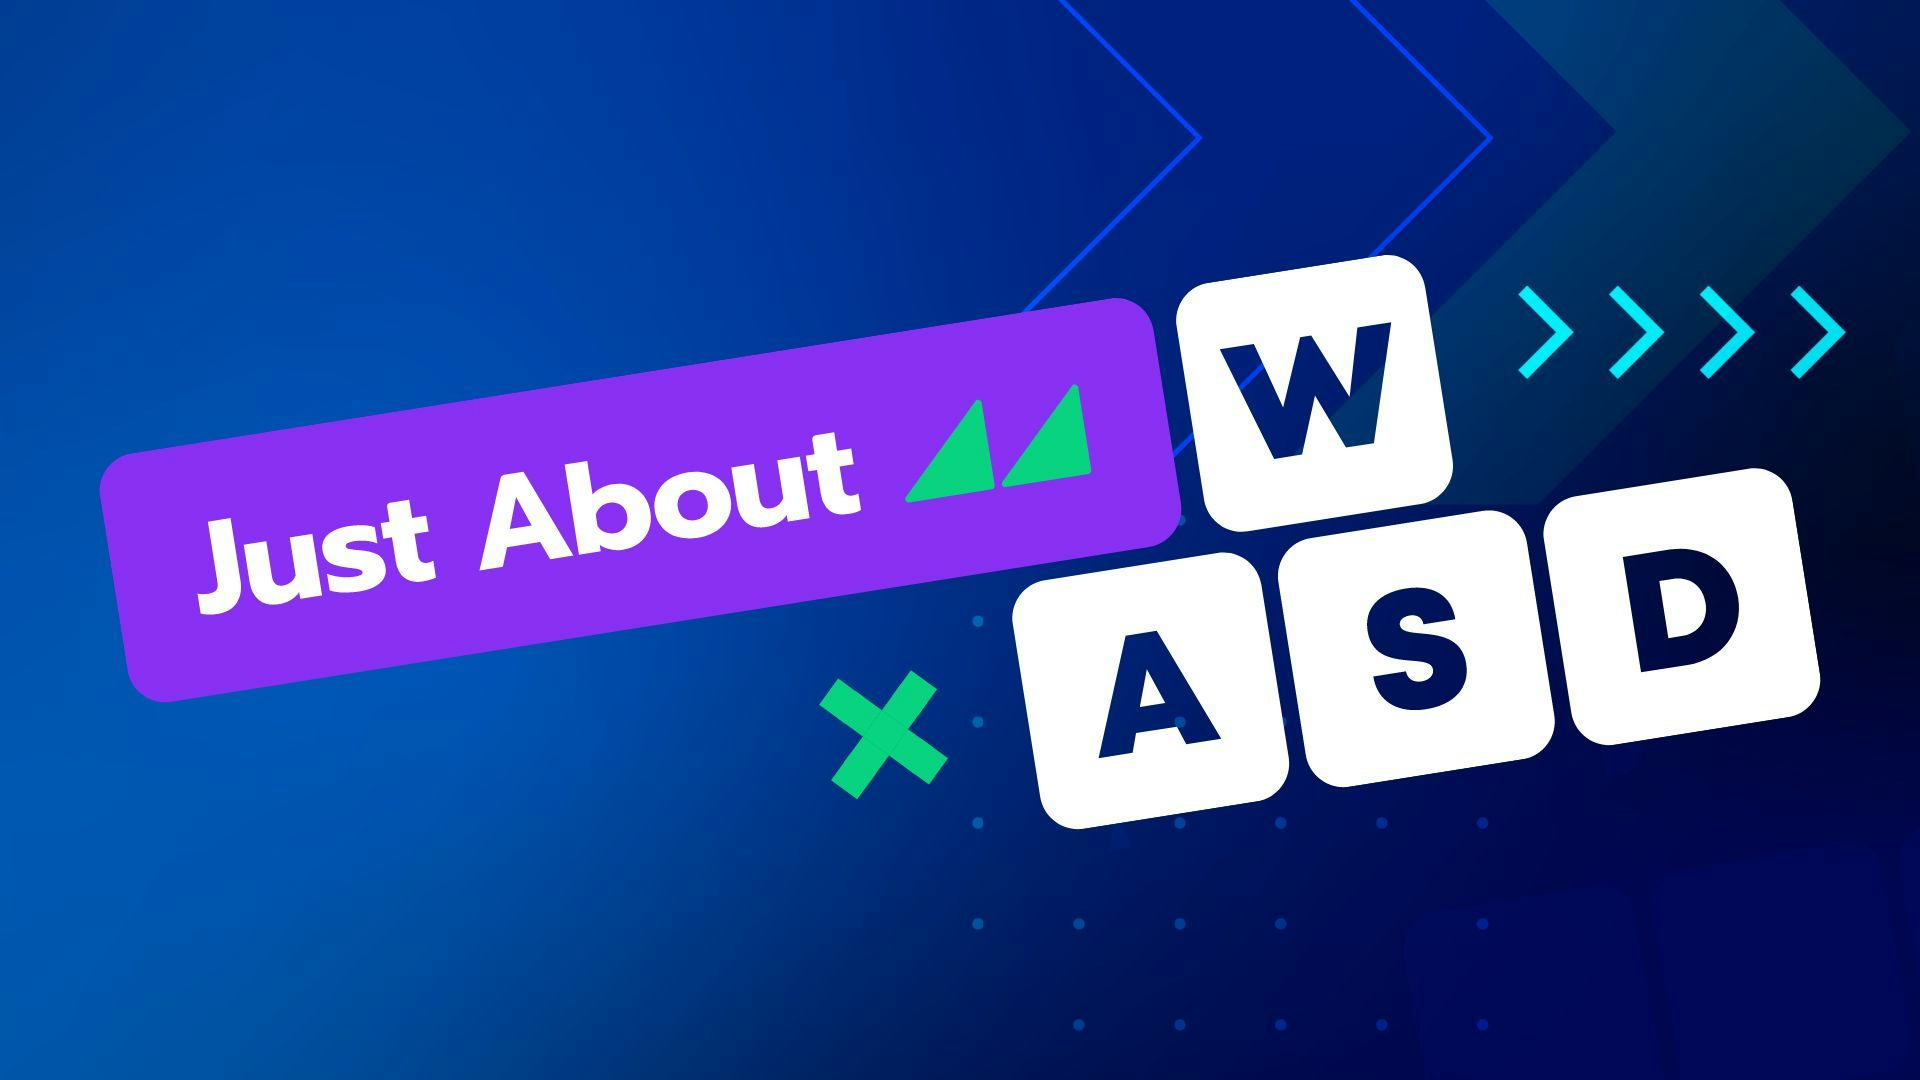 Just About WASD is now live!